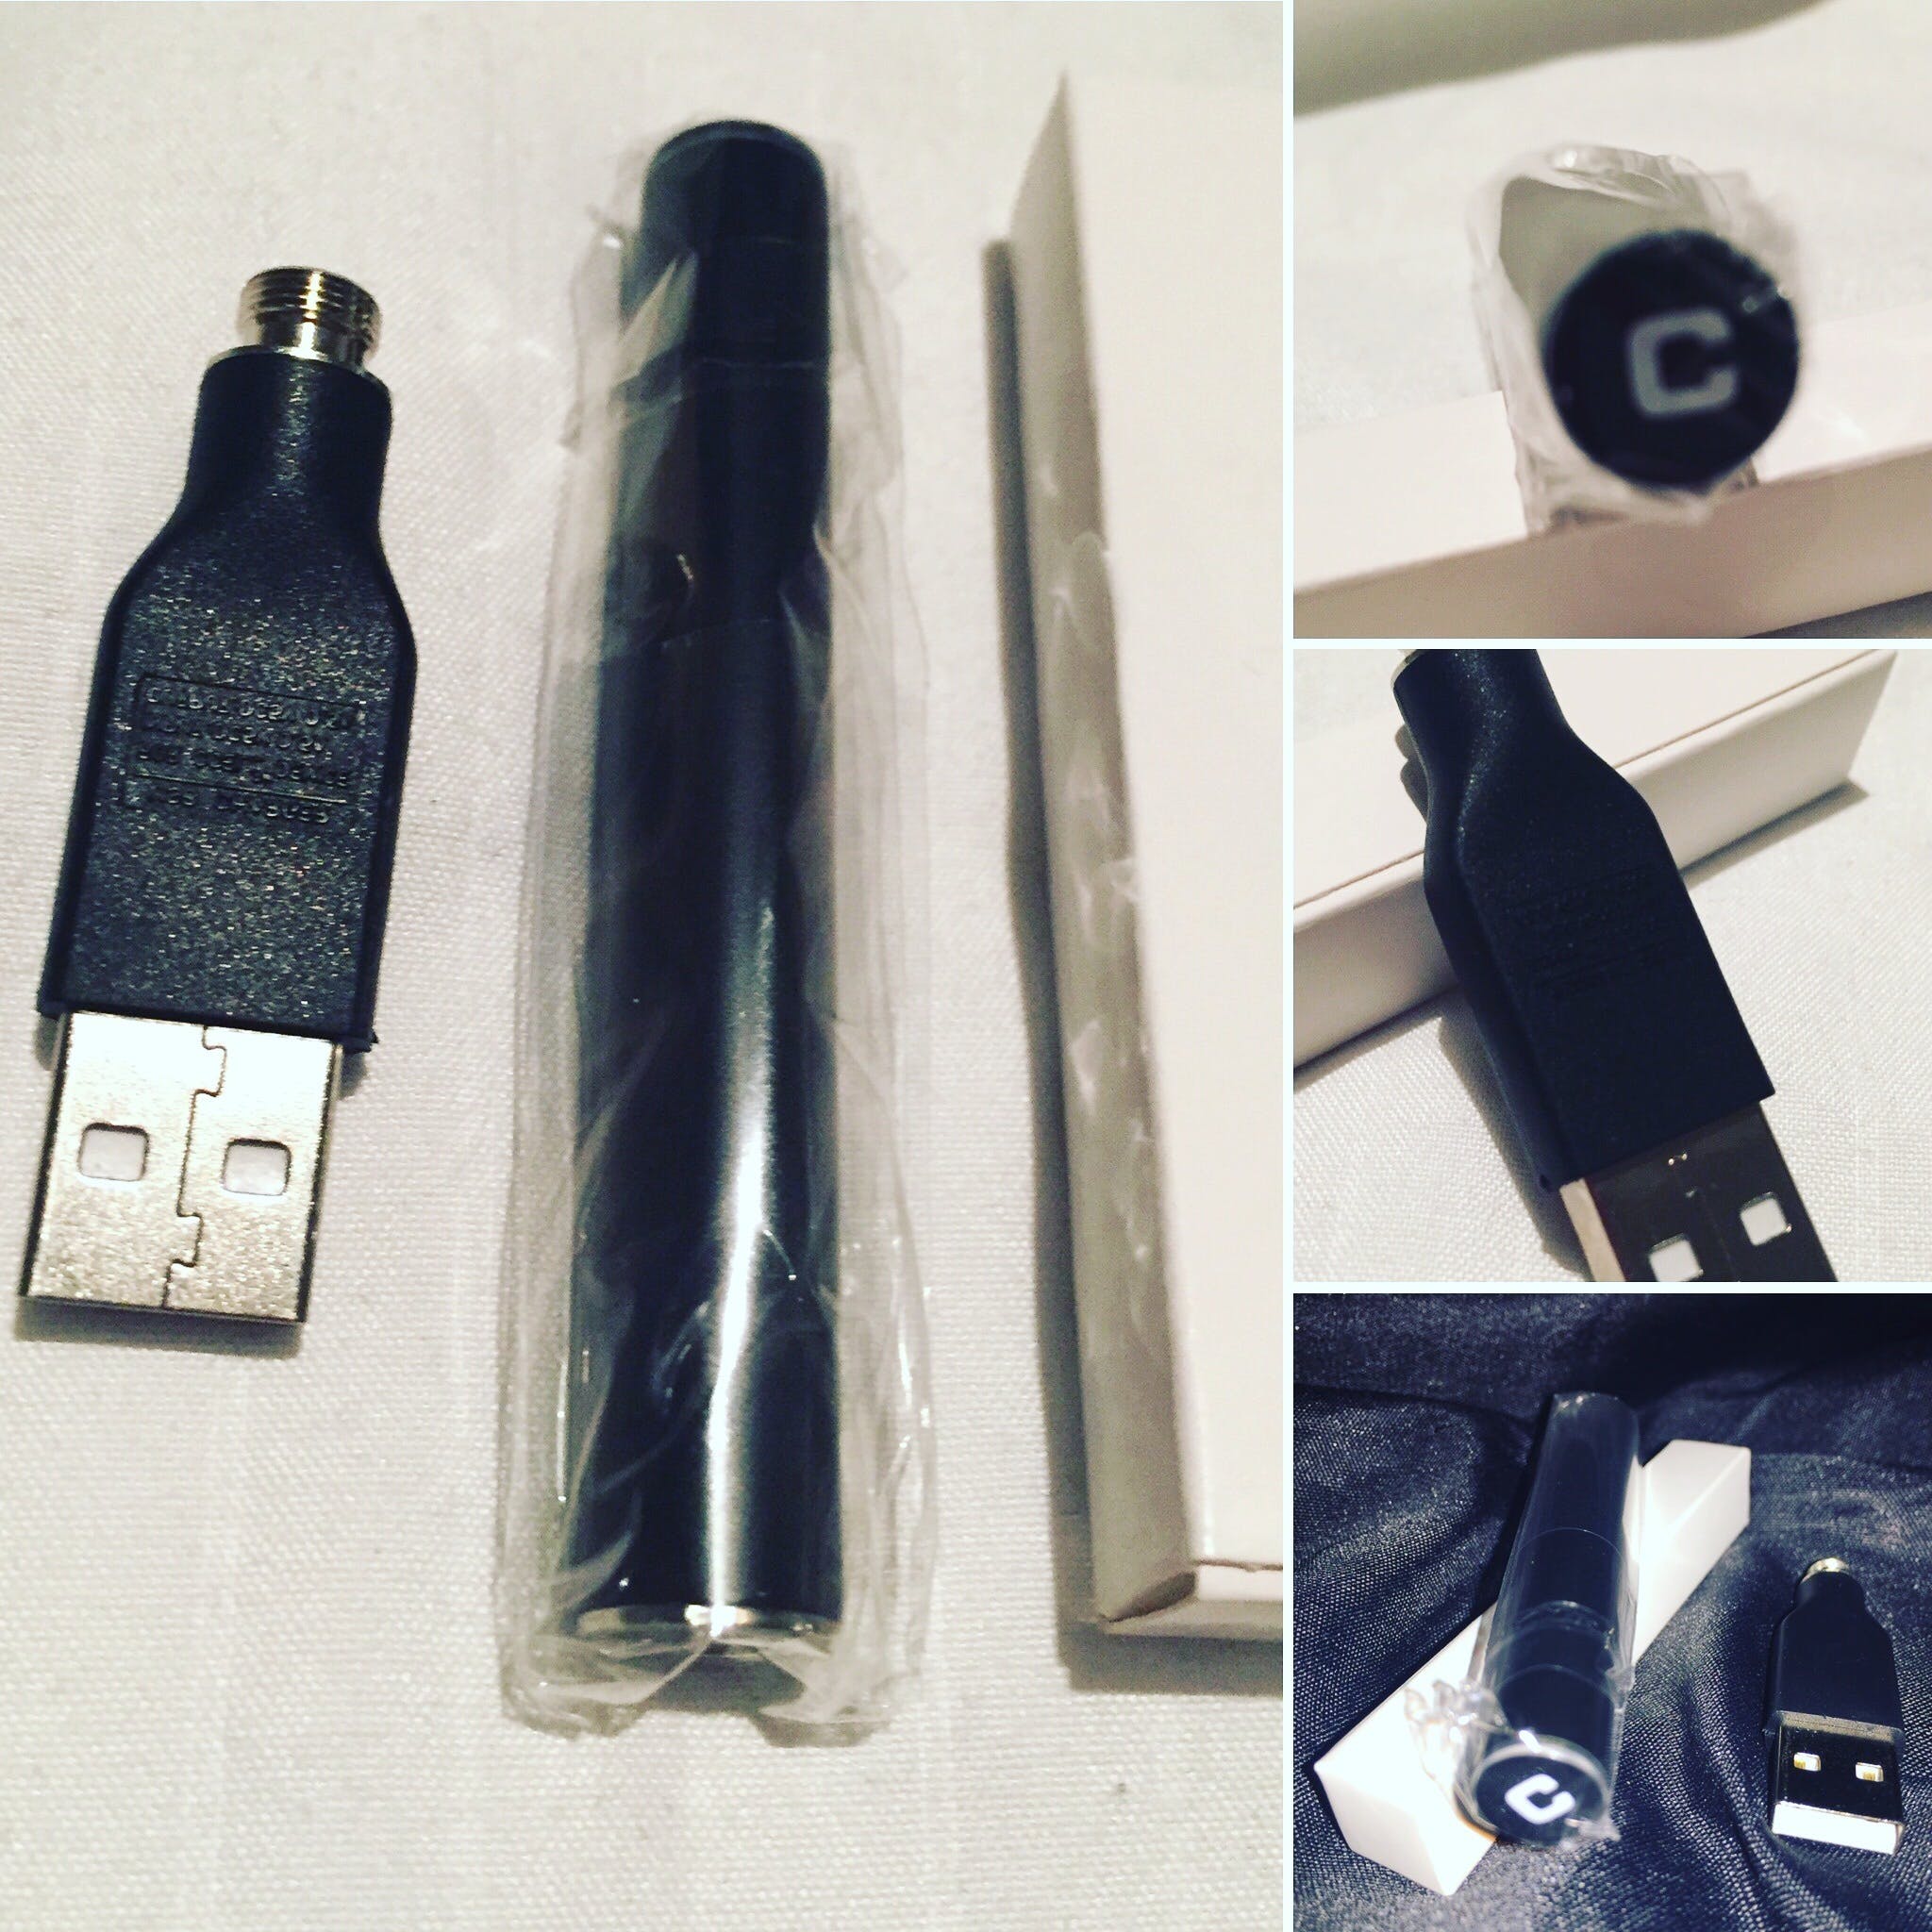 marijuana-dispensaries-please-call-for-appointment-location-fresno-top-quality-vape-pen-w-usb-charger-works-with-ccel-also